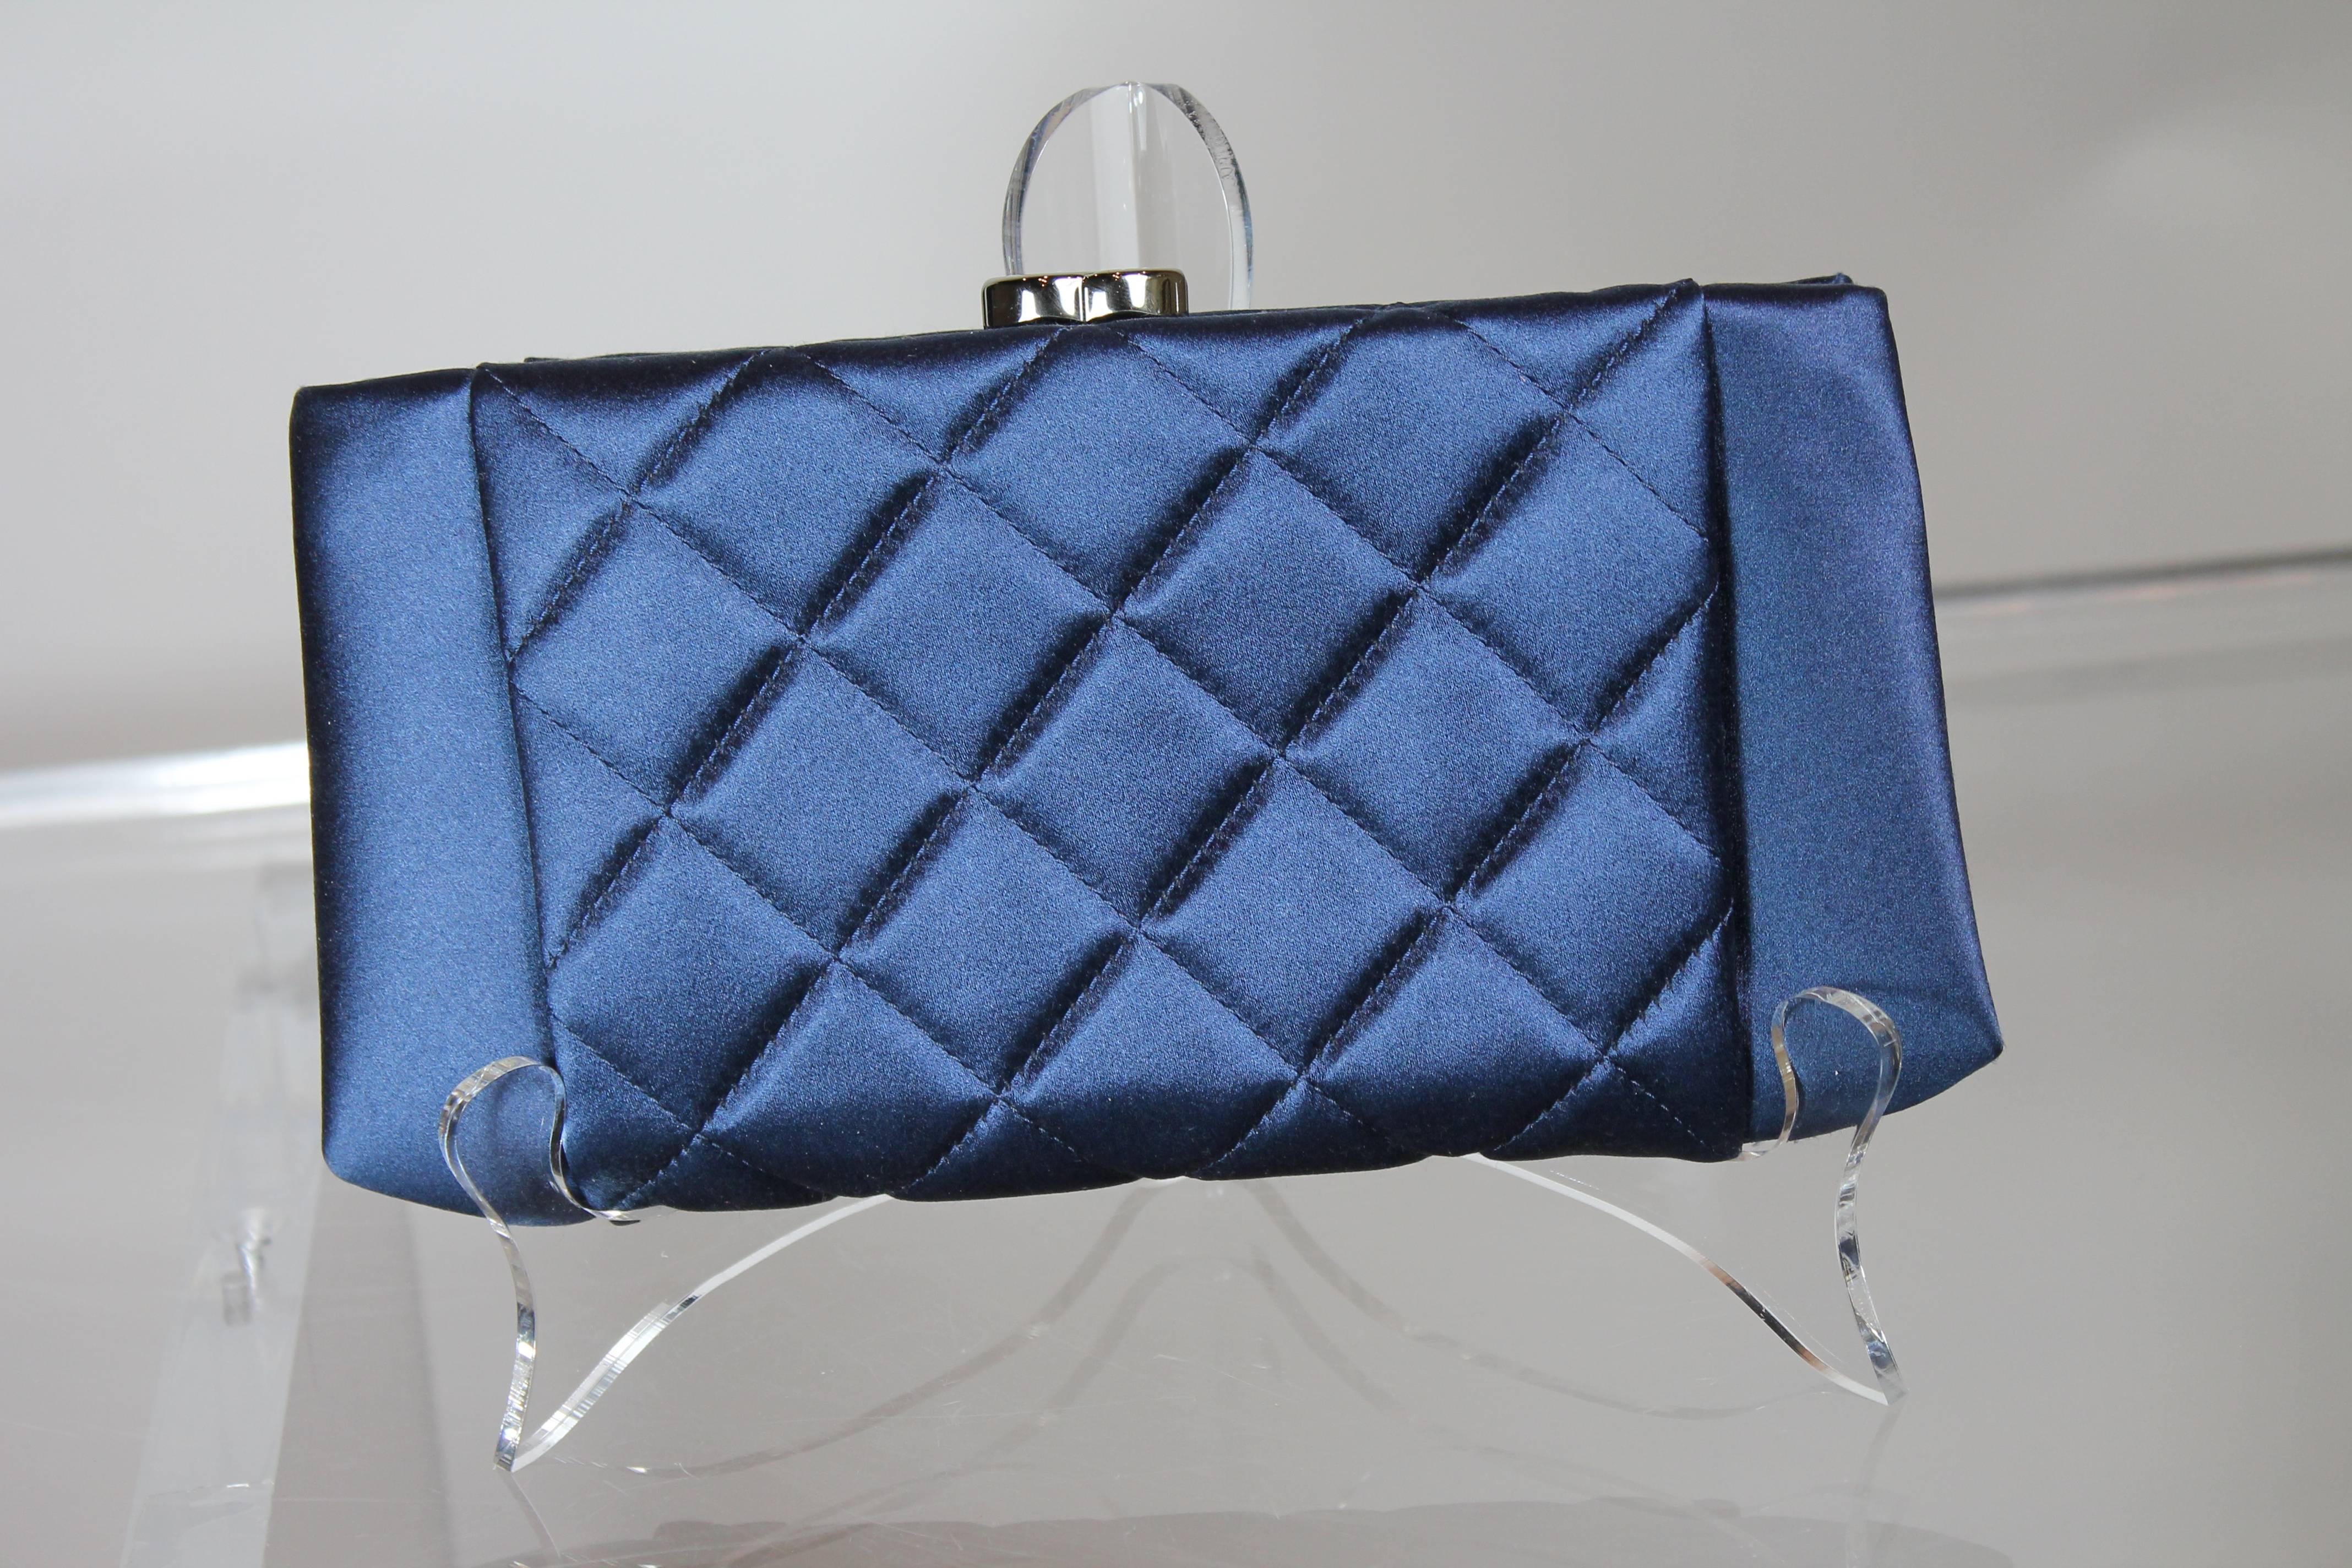 Chanel gives us the essential evening accessory with this clutch bag in navy blue quilted satin. 
Gunmetal hardware includes 